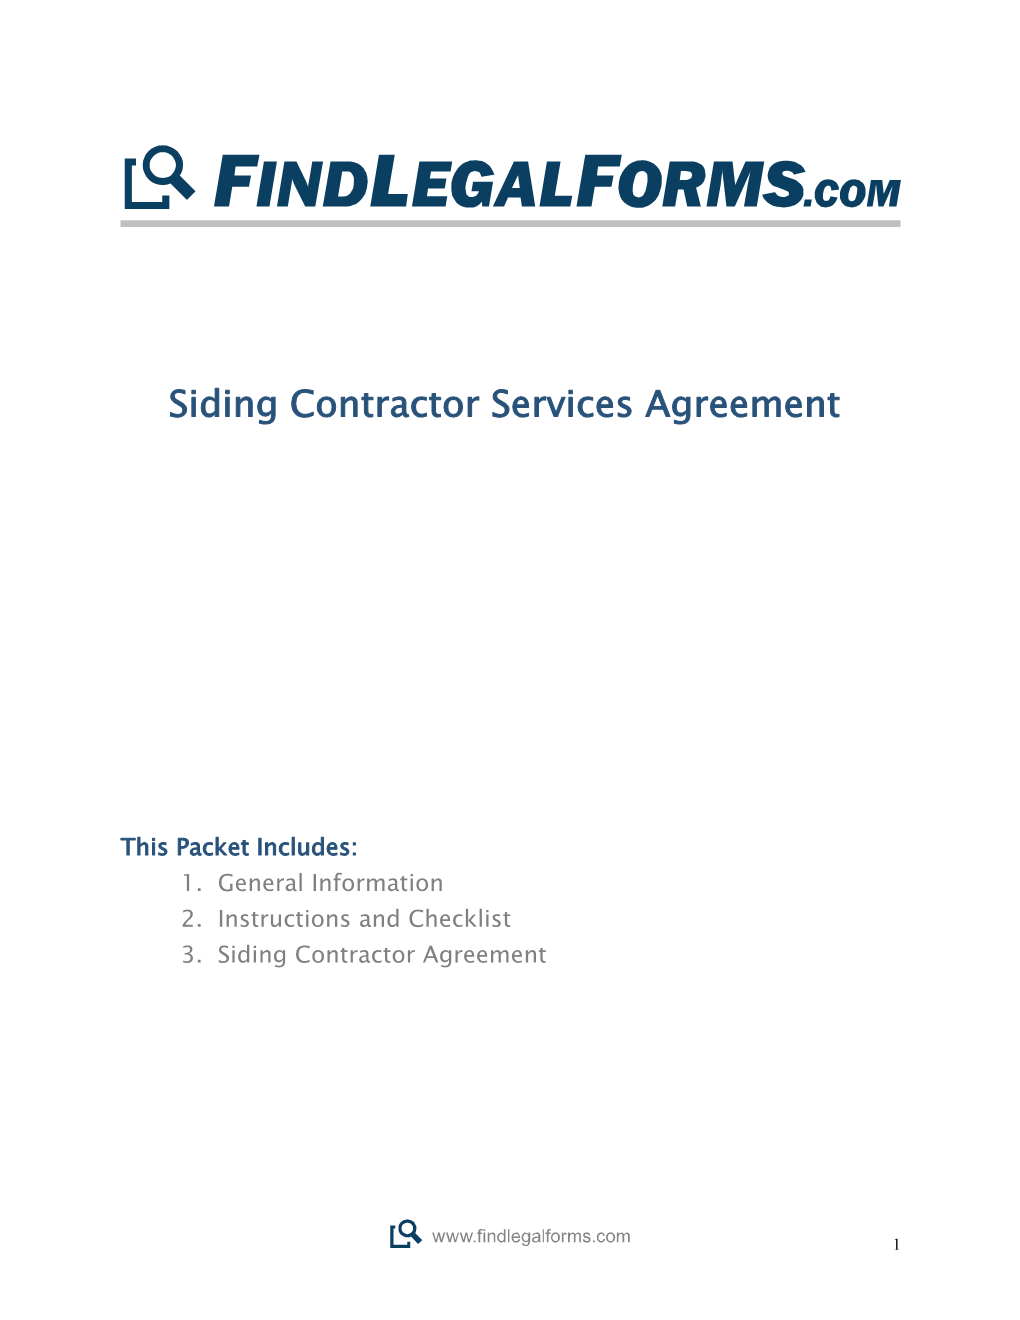 Siding Contractor Services Agreement